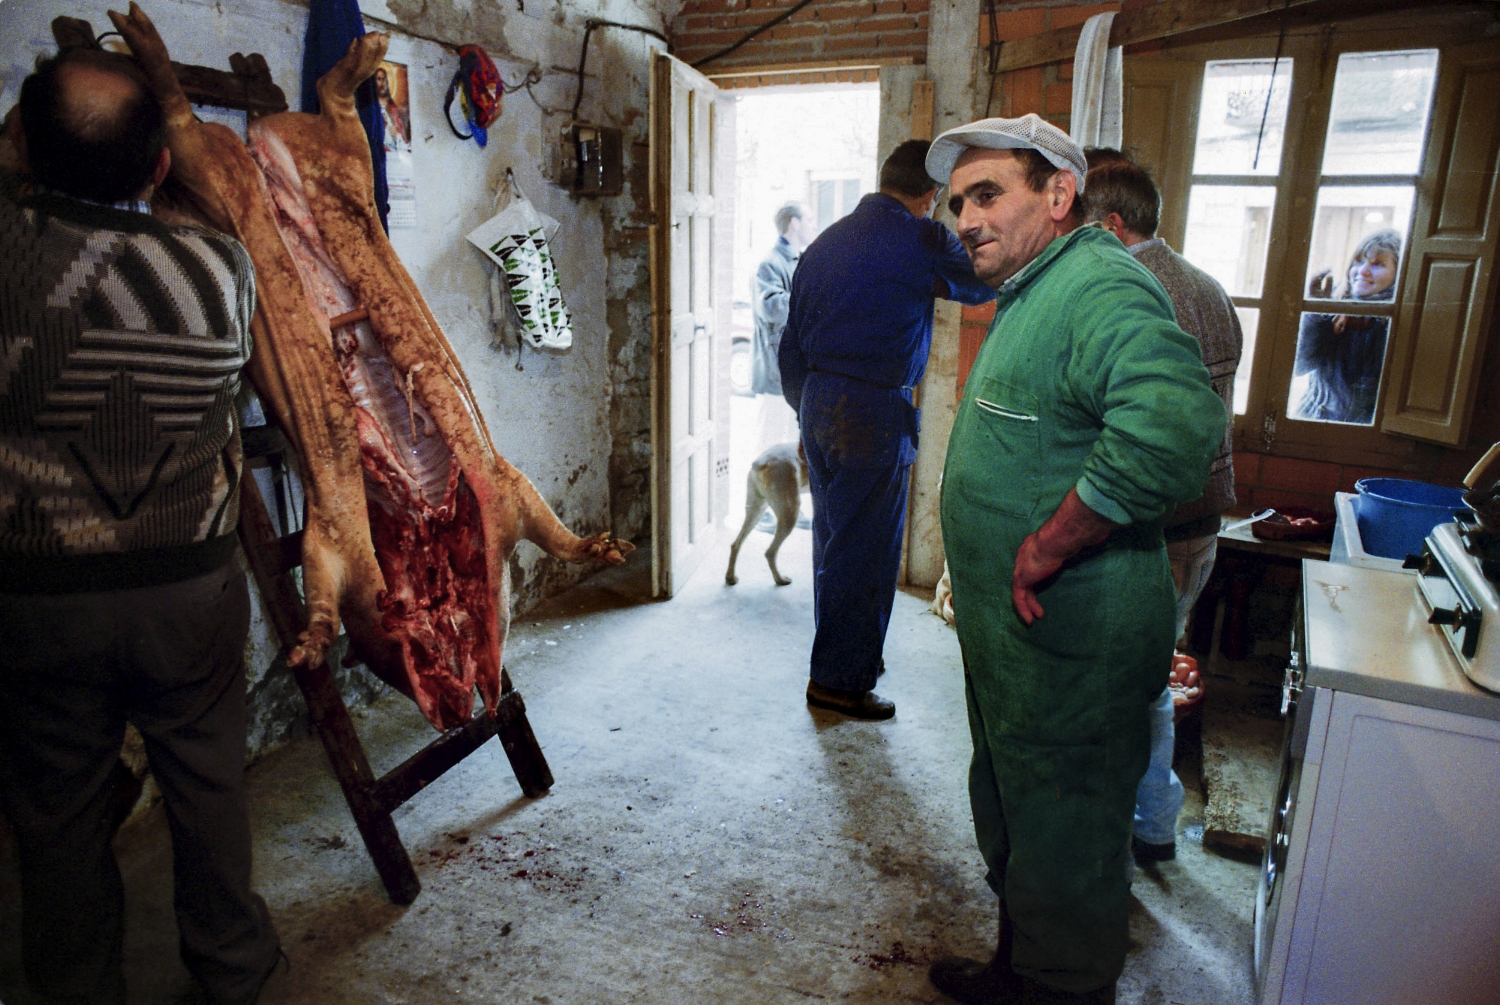  Villagers butcher a pig in their kitchen near Valladolid, Spain in a tradition called 'Matanza de puerco.' 